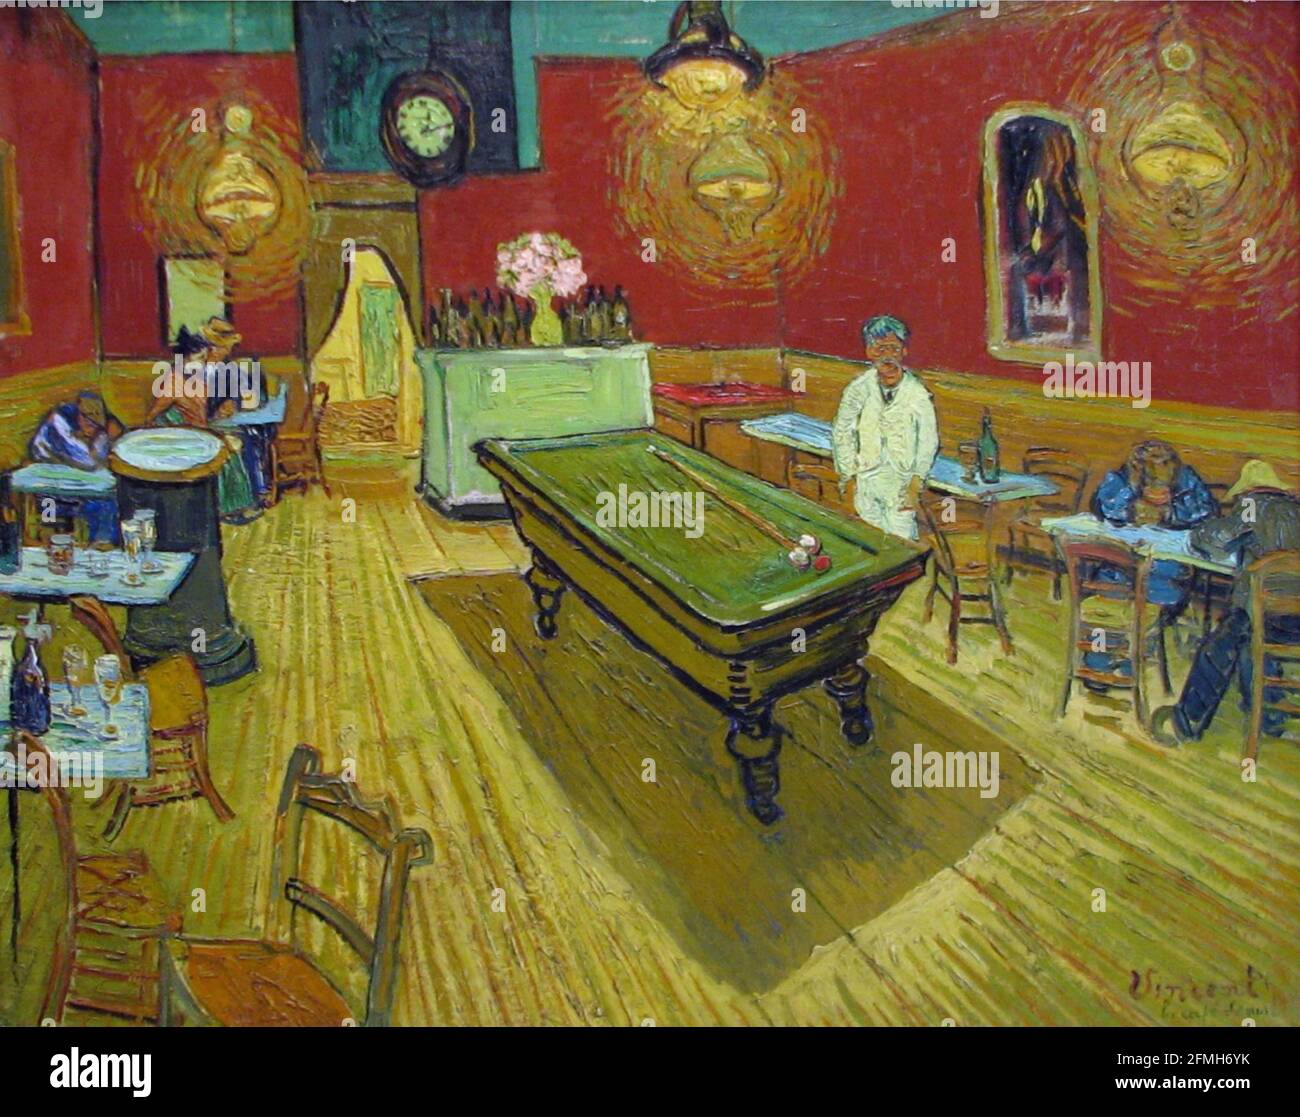 Vincent van Gogh artwork entitled The Night Cafe - Le Café de Nuit. A billiard table sits centre stage with customers sat at tables to the side. Stock Photo